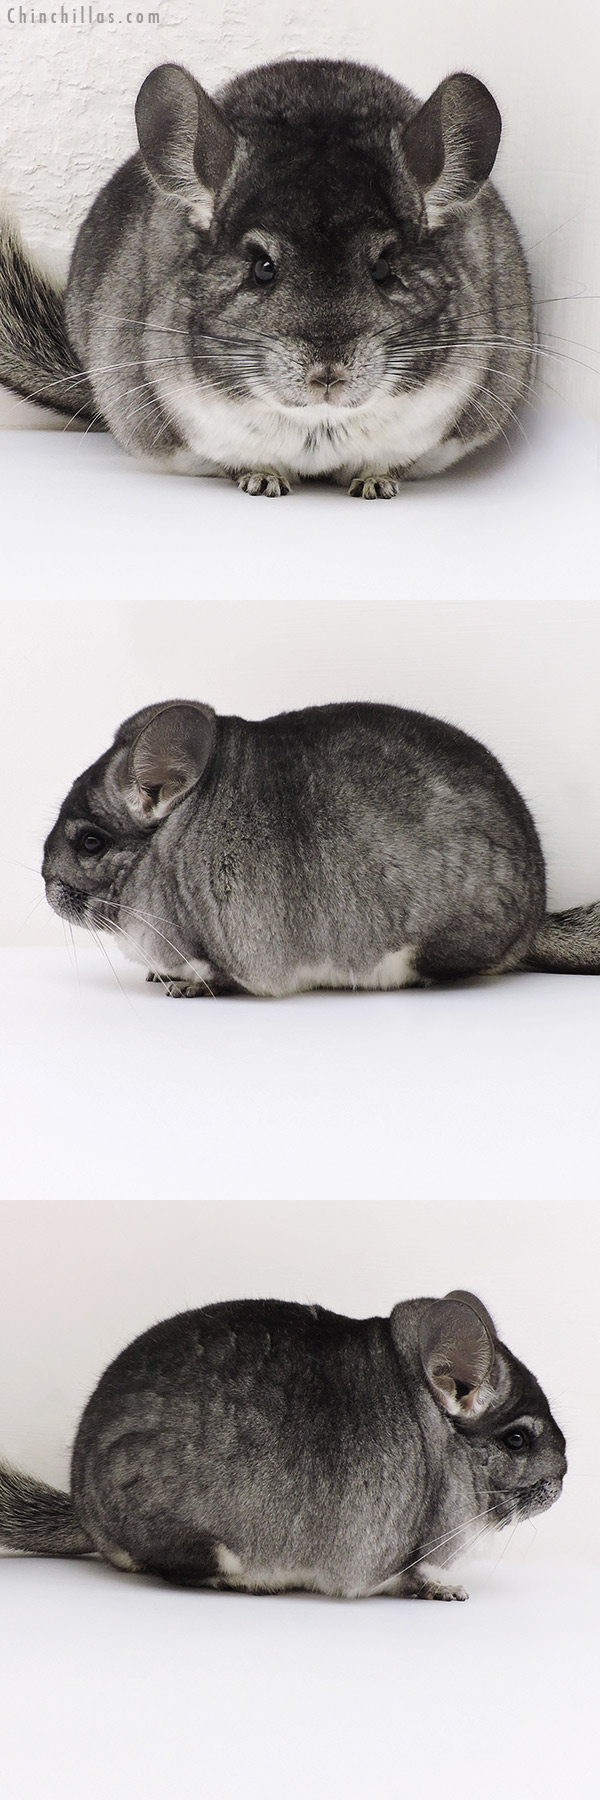 Chinchilla or related item offered for sale or export on Chinchillas.com - 17189 Large Blocky Premium Production Quality Standard Female Chinchilla